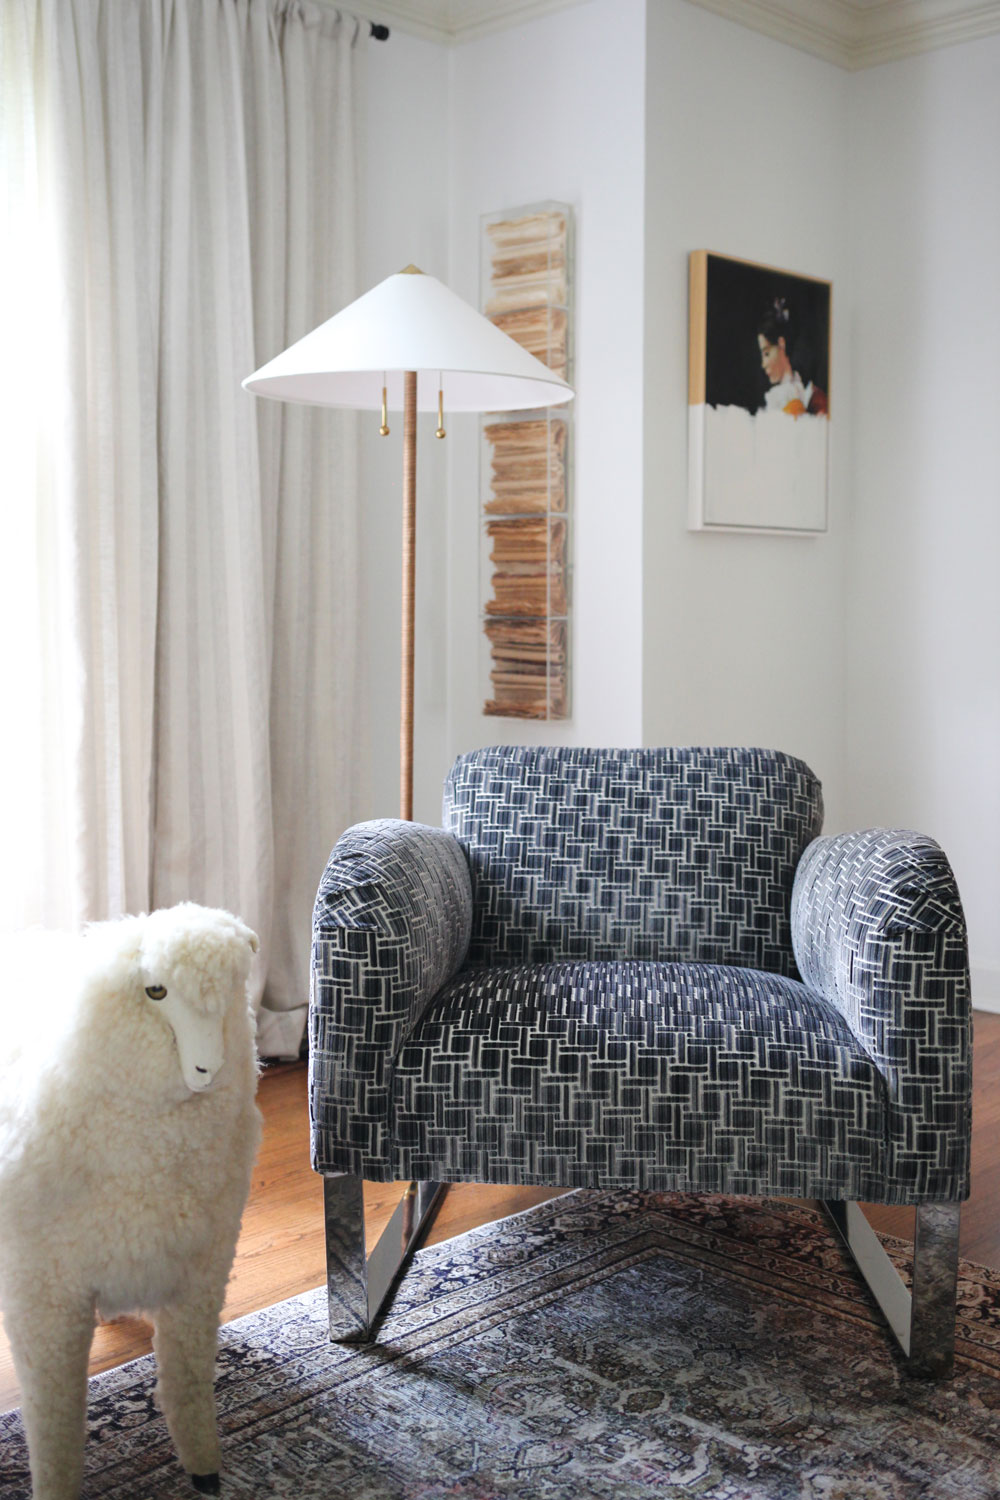 Upholstery for vintage chairs